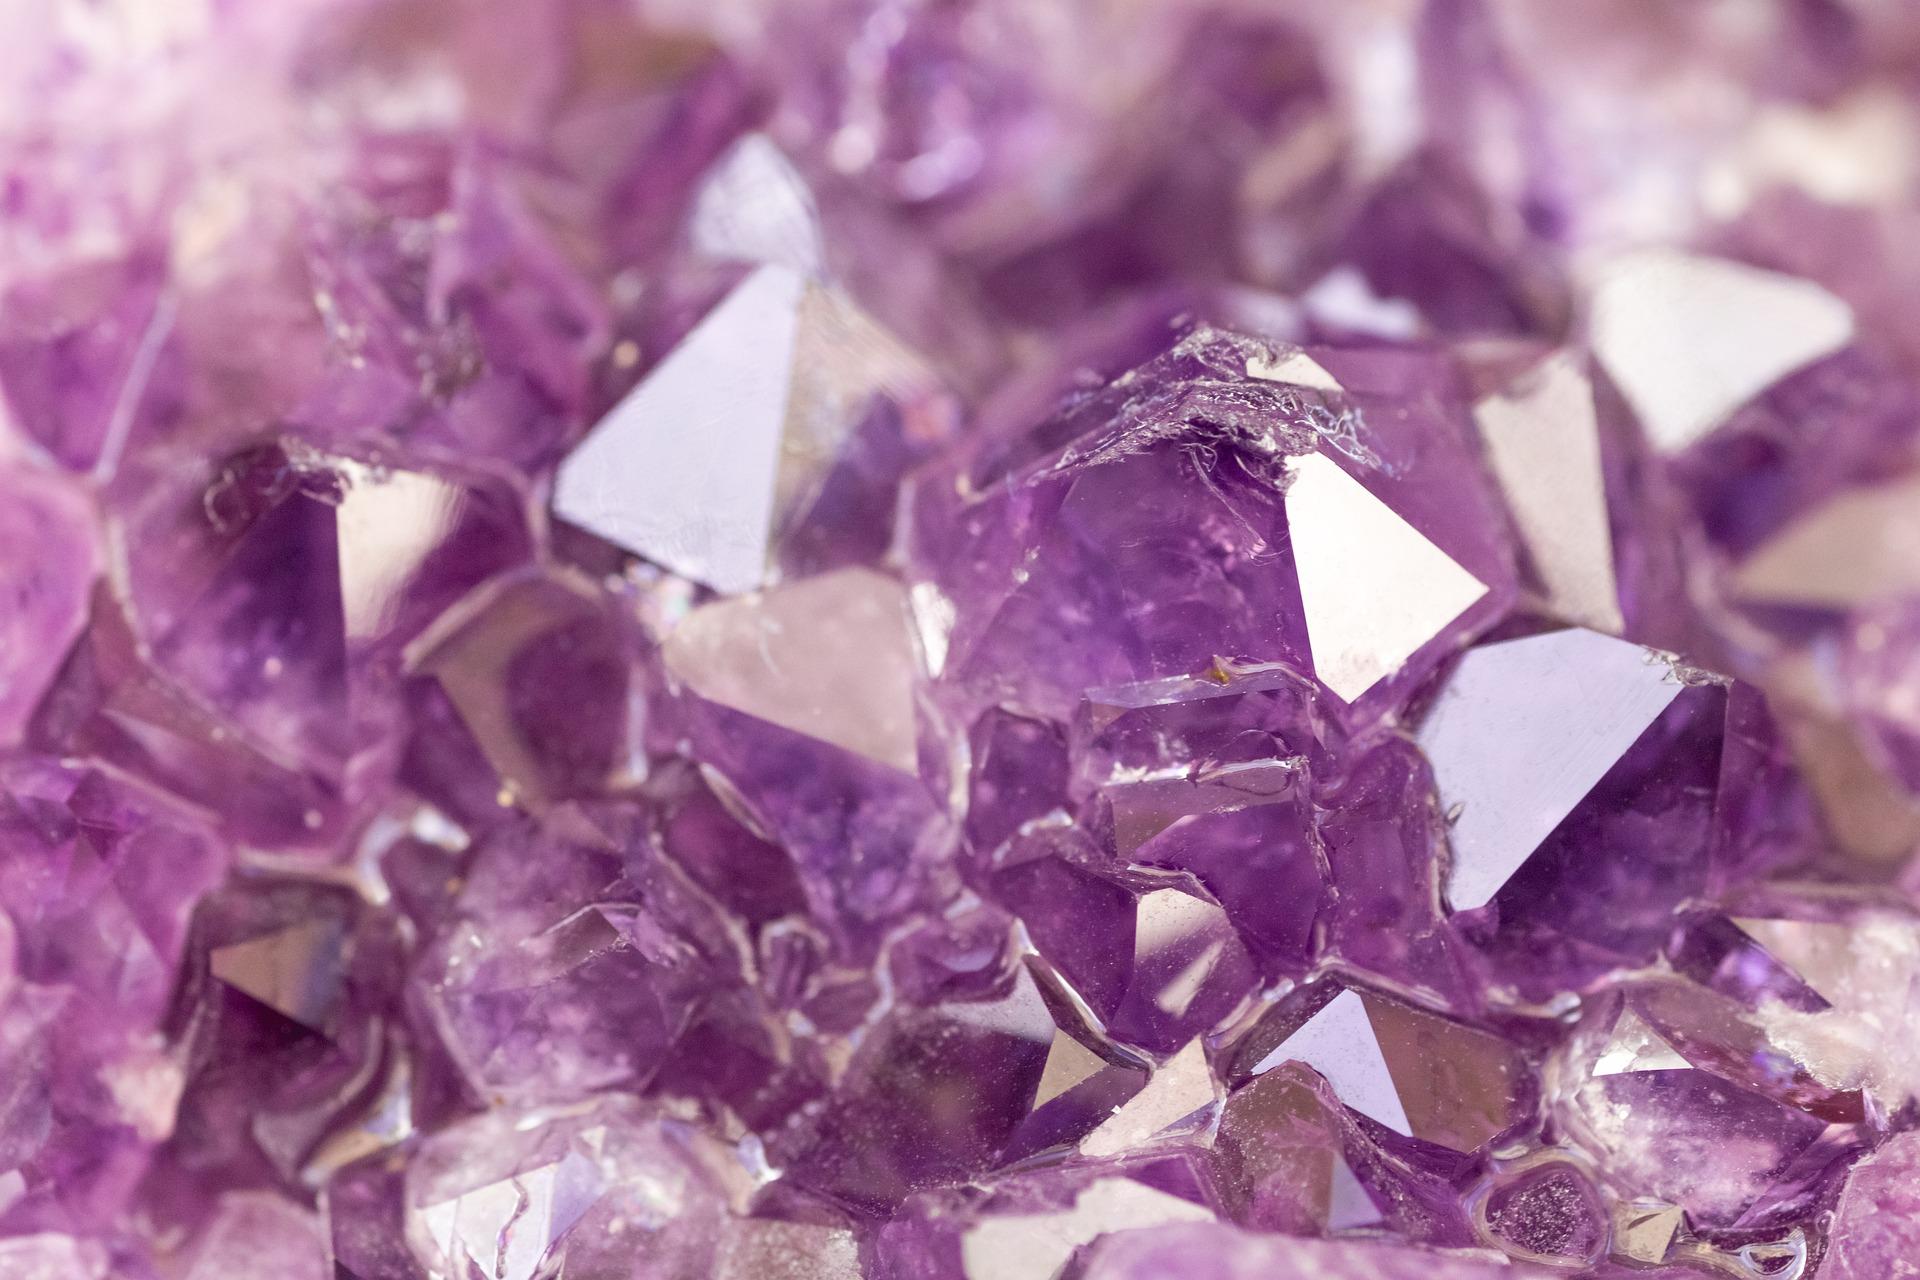 How to charge crystals | The Definitive Guide